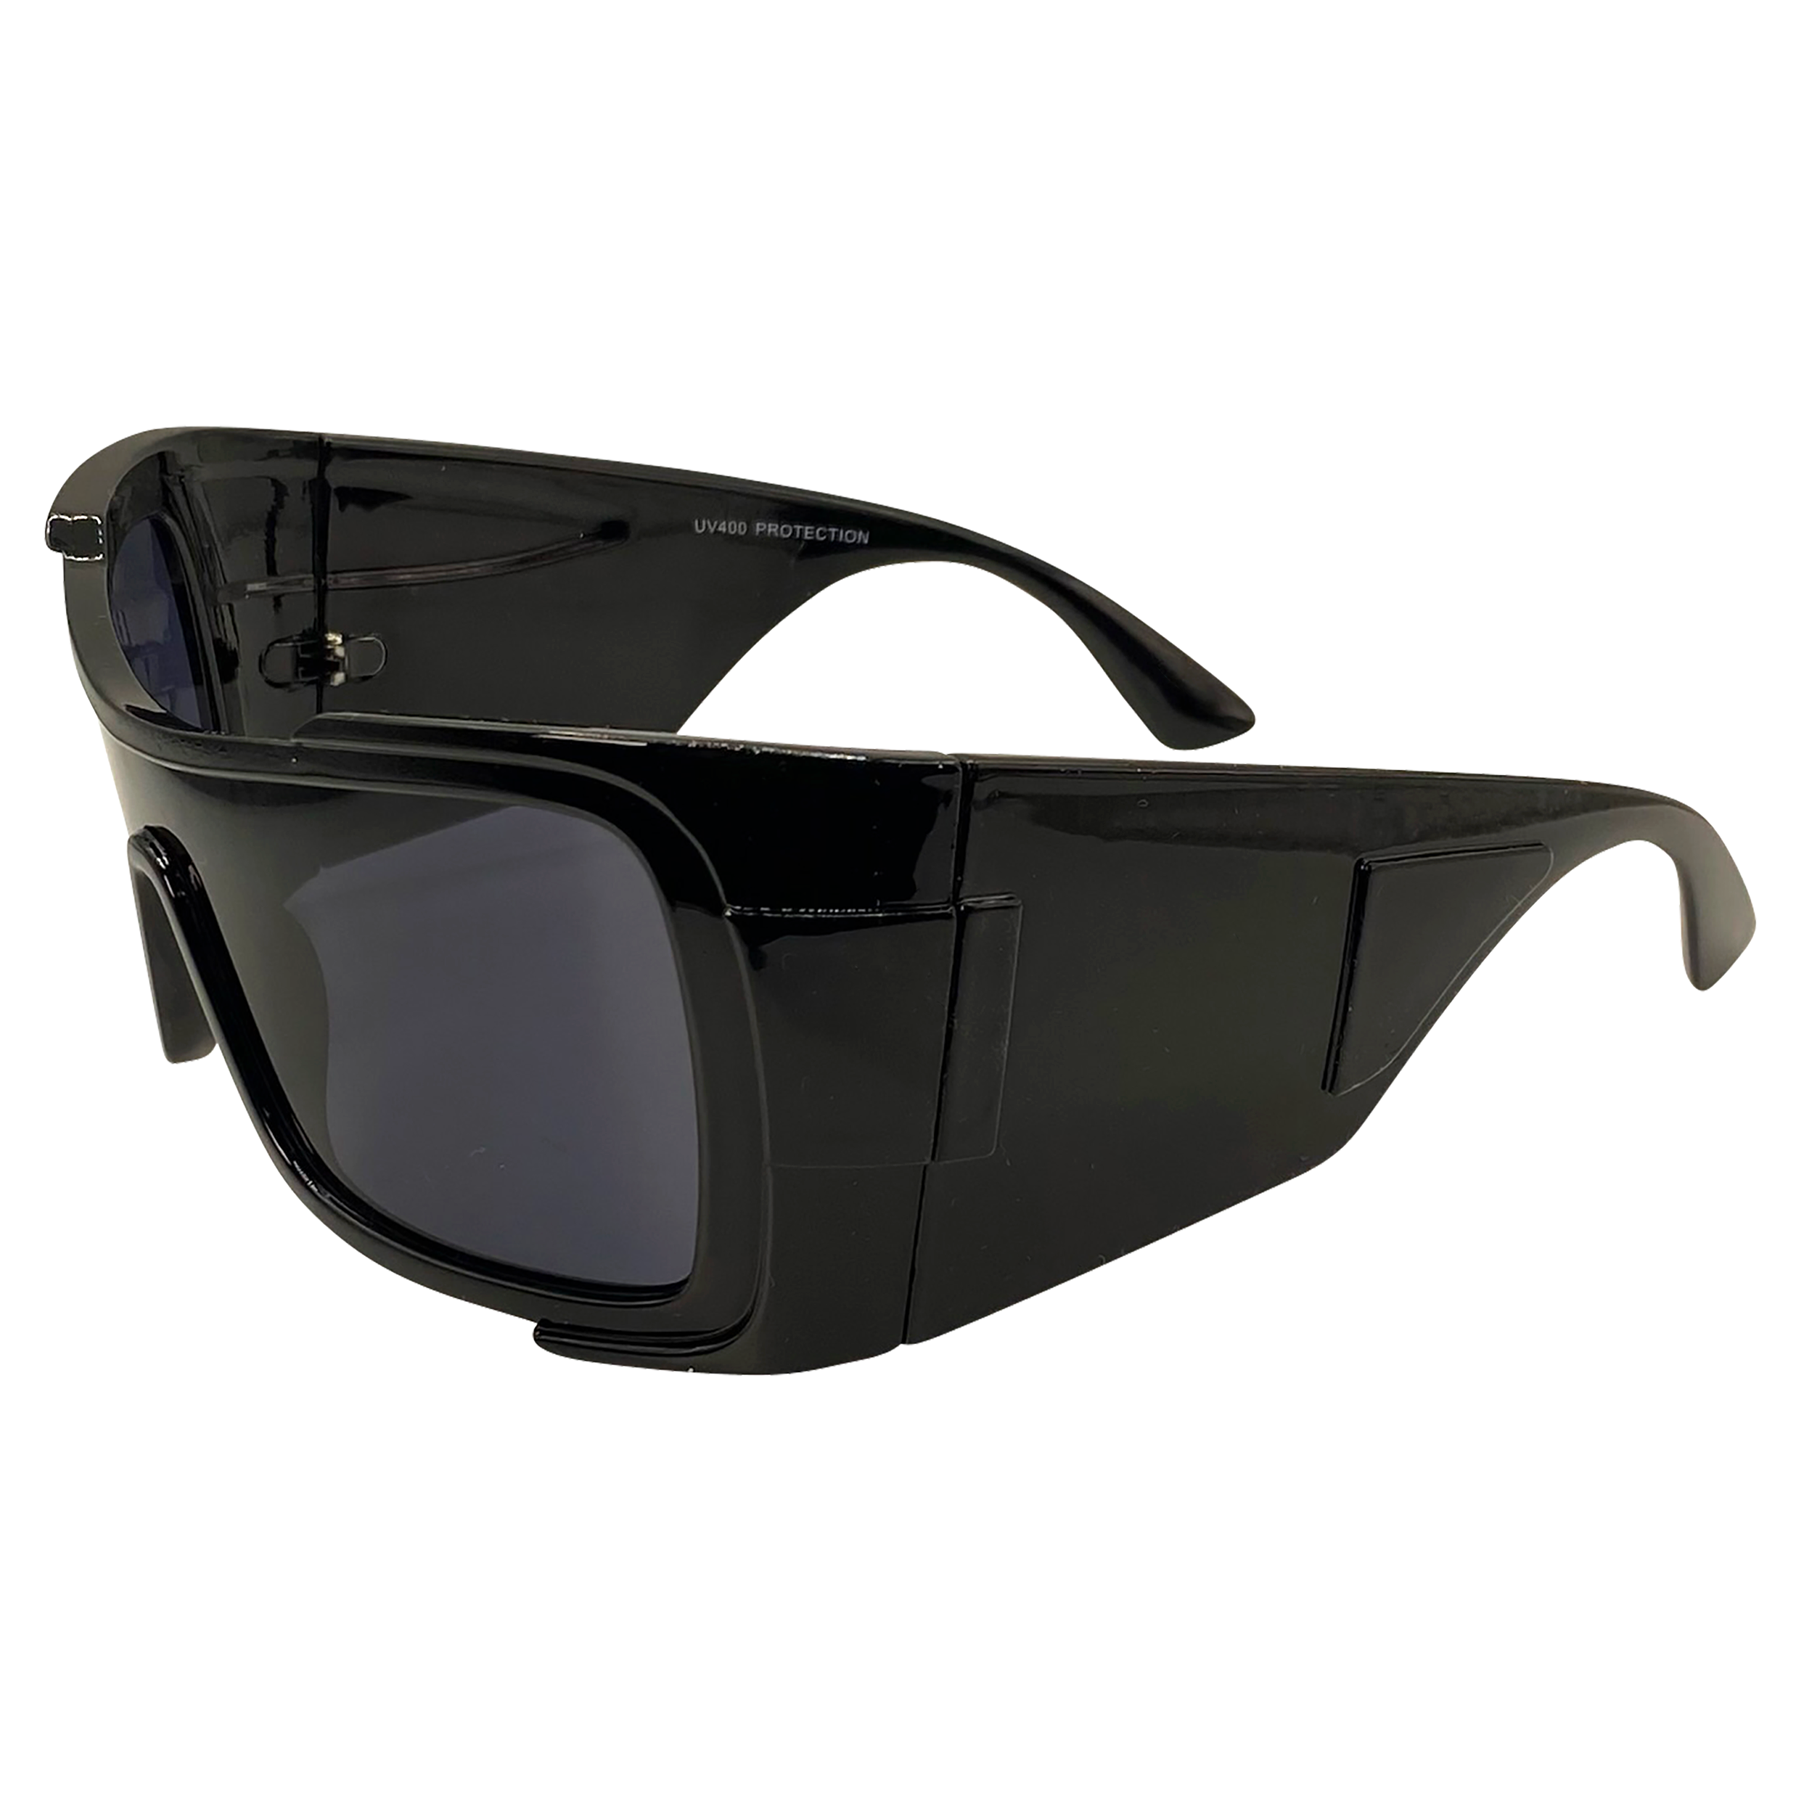 big sunglasses with a glass black wrap around style frame, with super dark lens